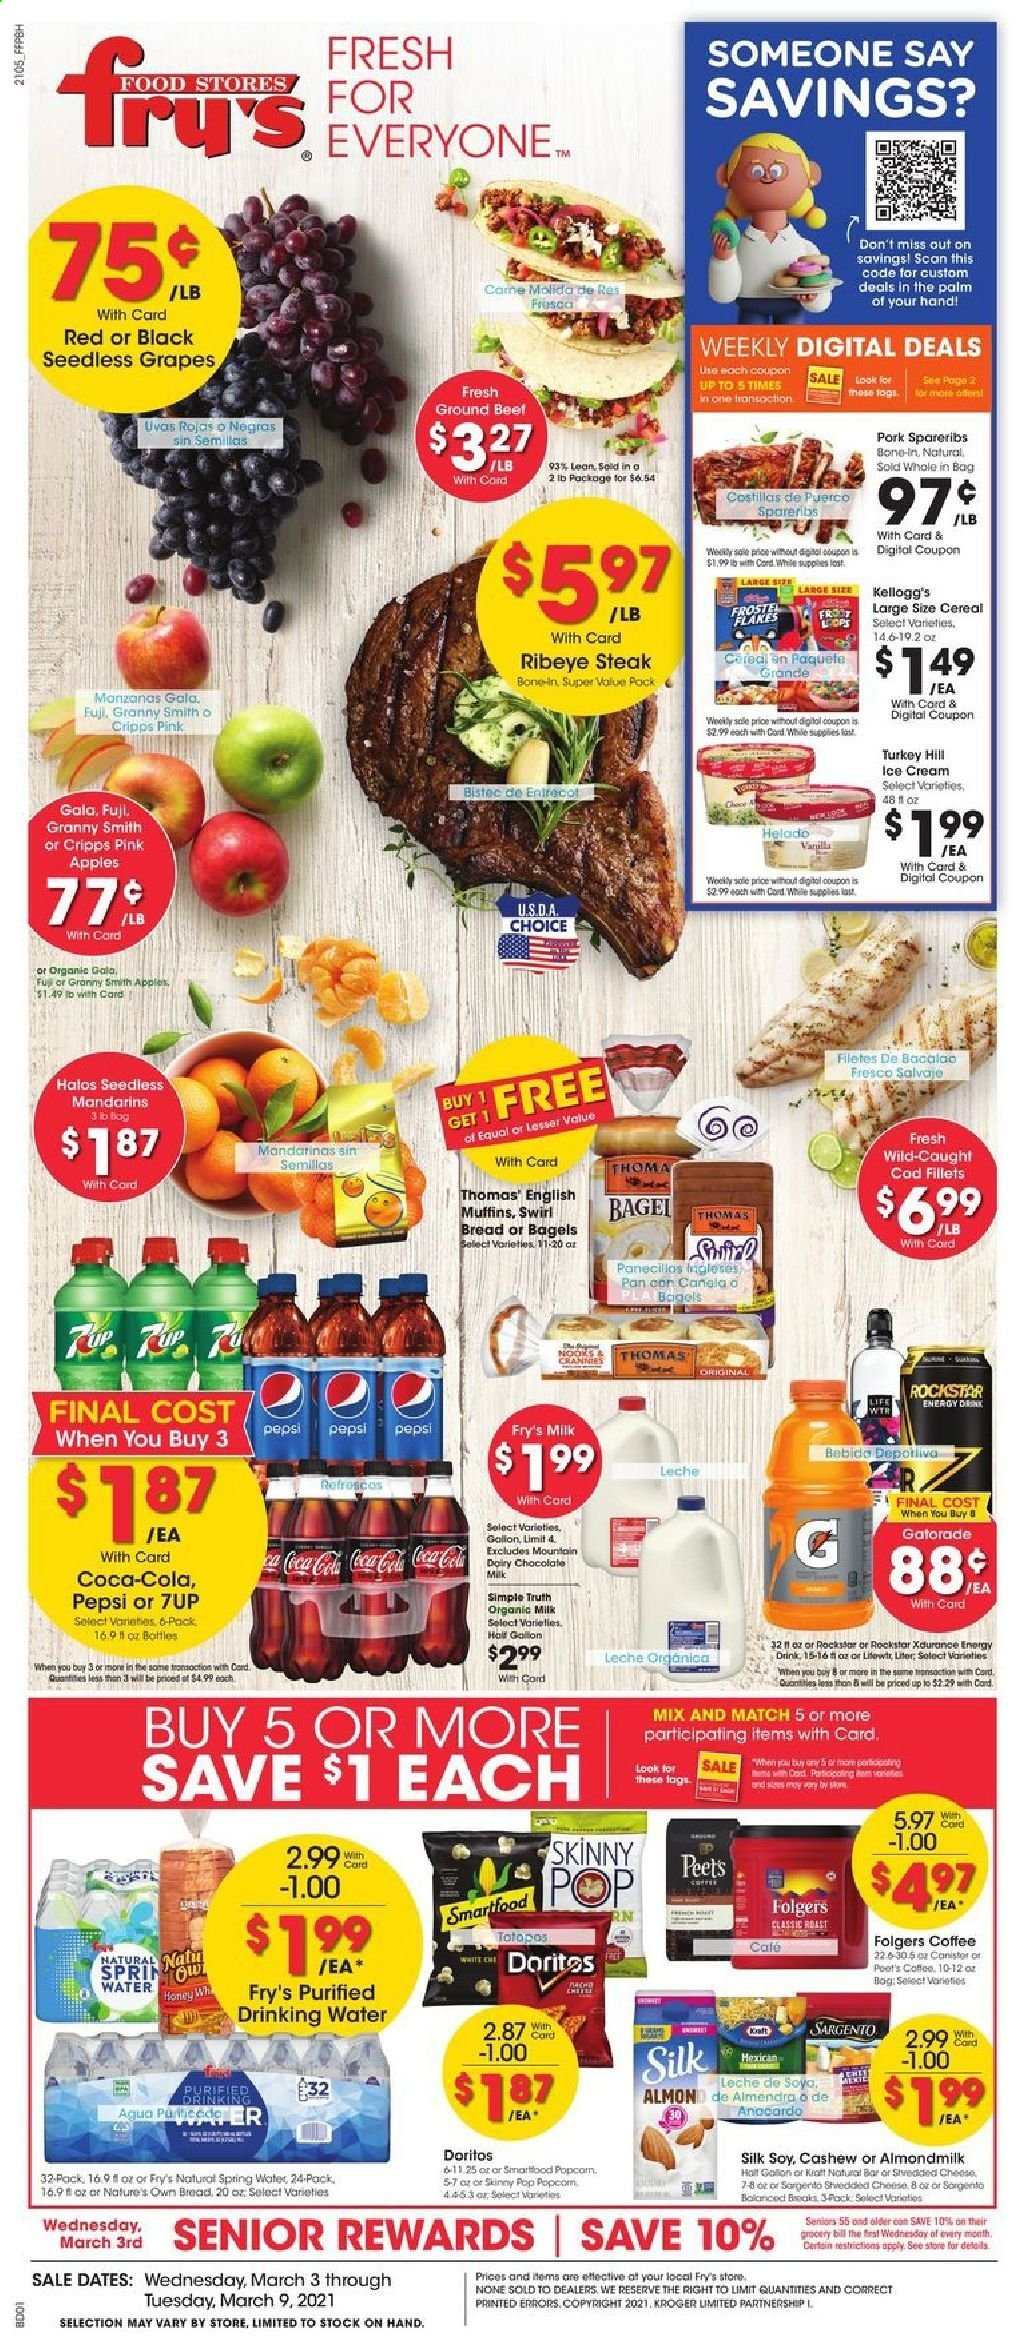 thumbnail - Fry’s Flyer - 03/03/2021 - 03/09/2021 - Sales products - seedless grapes, bread, bagels, muffin, apples, cod, english muffins, cheese, Sargento, almond milk, organic milk, Silk, Kellogg's, Doritos, Smartfood, popcorn, Skinny Pop, mandarines, cereals, honey, Coca-Cola, Pepsi, energy drink, 7UP, Rockstar, Gatorade, spring water, coffee, Folgers, L'Or, beef meat, beef steak, ground beef, steak, ribeye steak, pork spare ribs, pan, Nature's Own. Page 1.